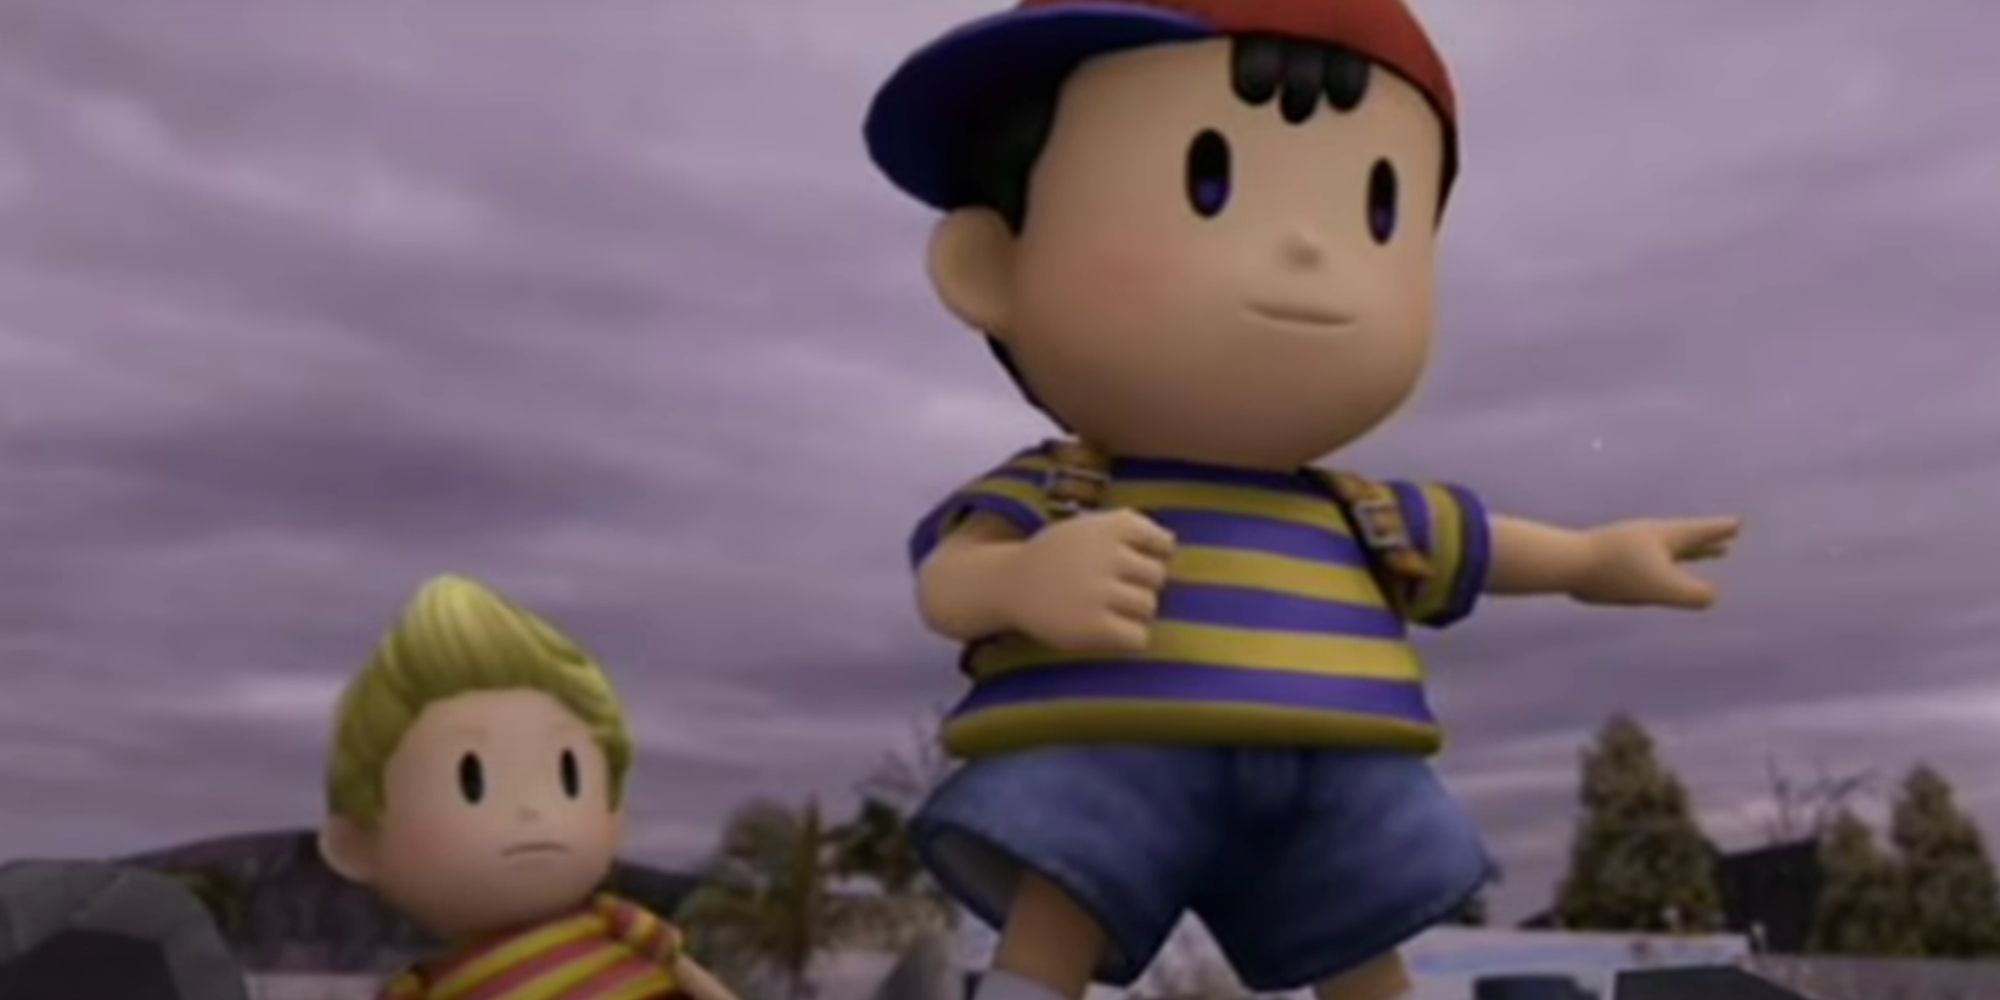 Ness and Lucas from the Mother or Earthbound series